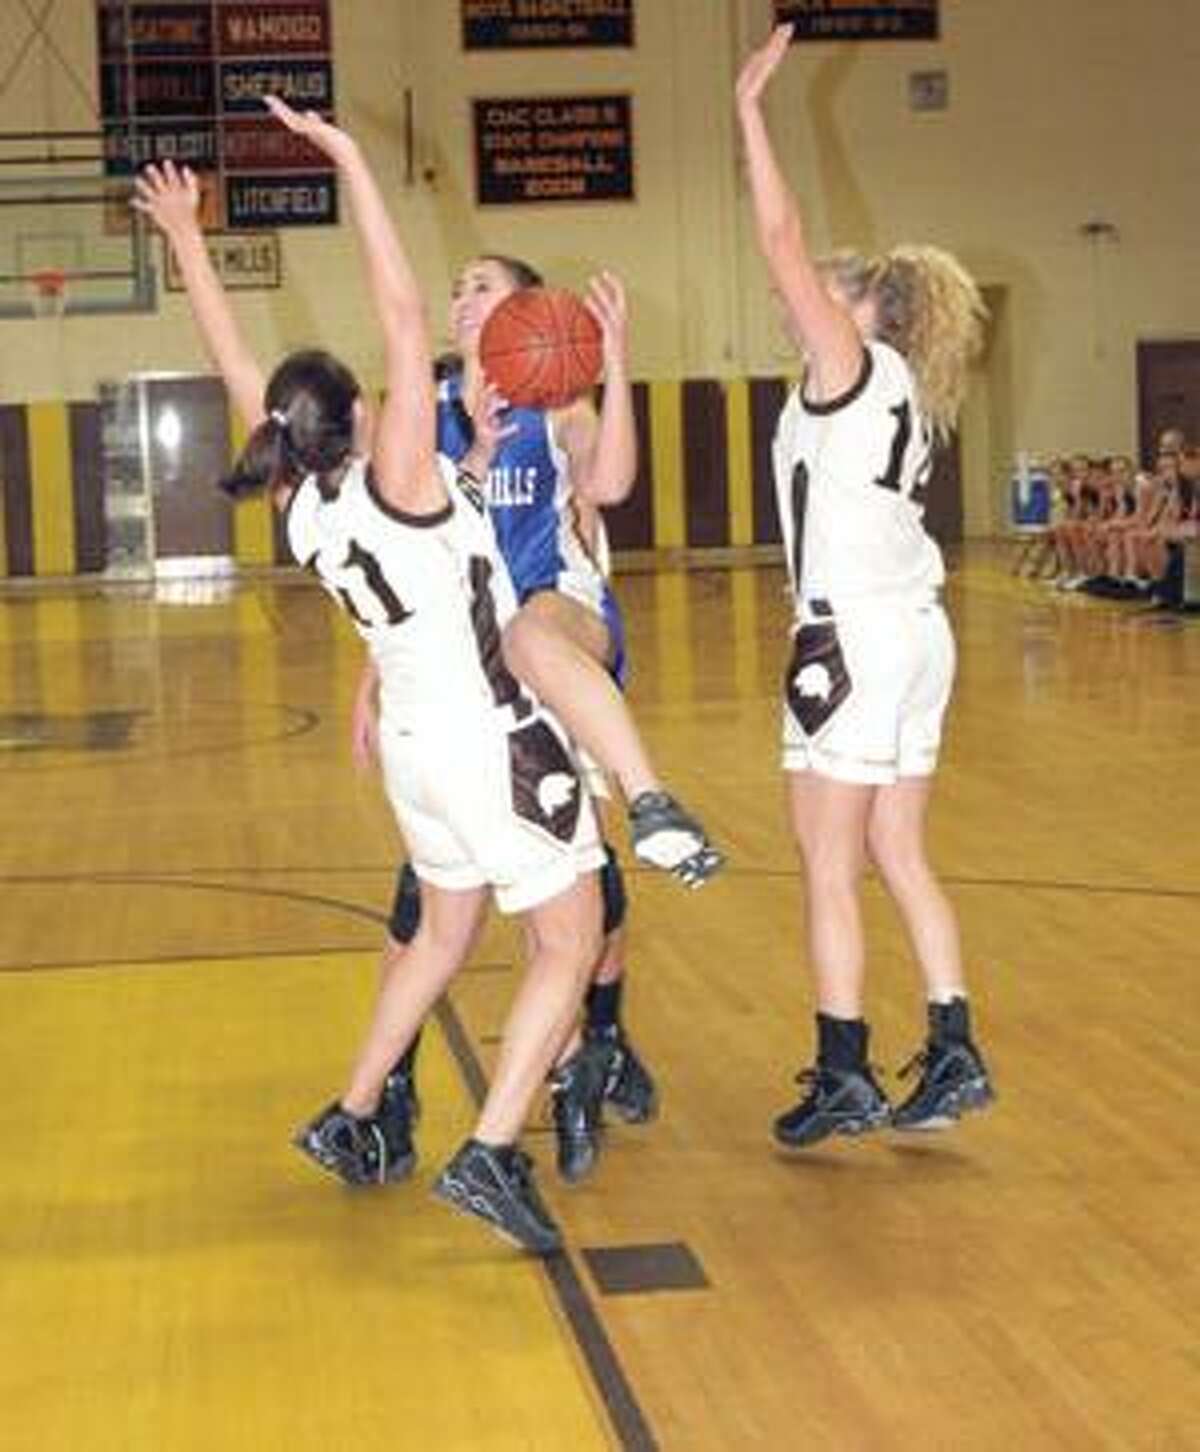 SONJA ZINKE/Register Citizen Lewis Mills' Kaitlin Niedmann goes up for a shot as Thomaston's Scarra Brandt defends during Wednesday's game in Thomaston. Purchase a glossy print of this photo and more at www.registercitizen.com.